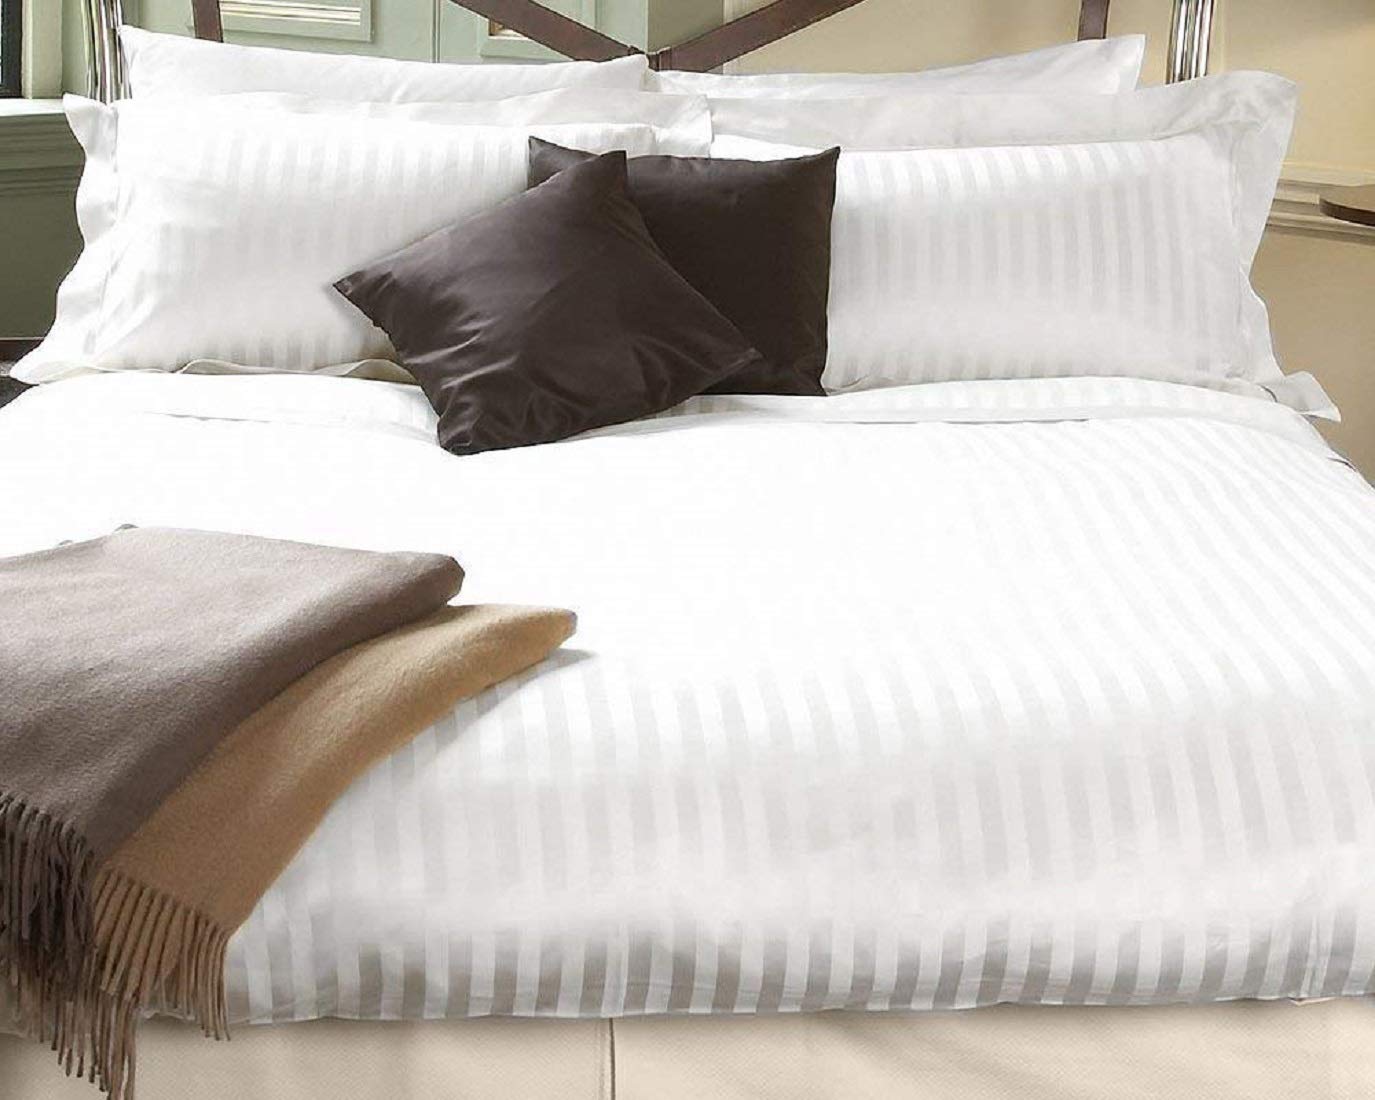 Kuber Industries Double Bedsheet with 2 Pillow Covers|Cotton Material & Satin Stripes|Size 254 x 228 CM (White)